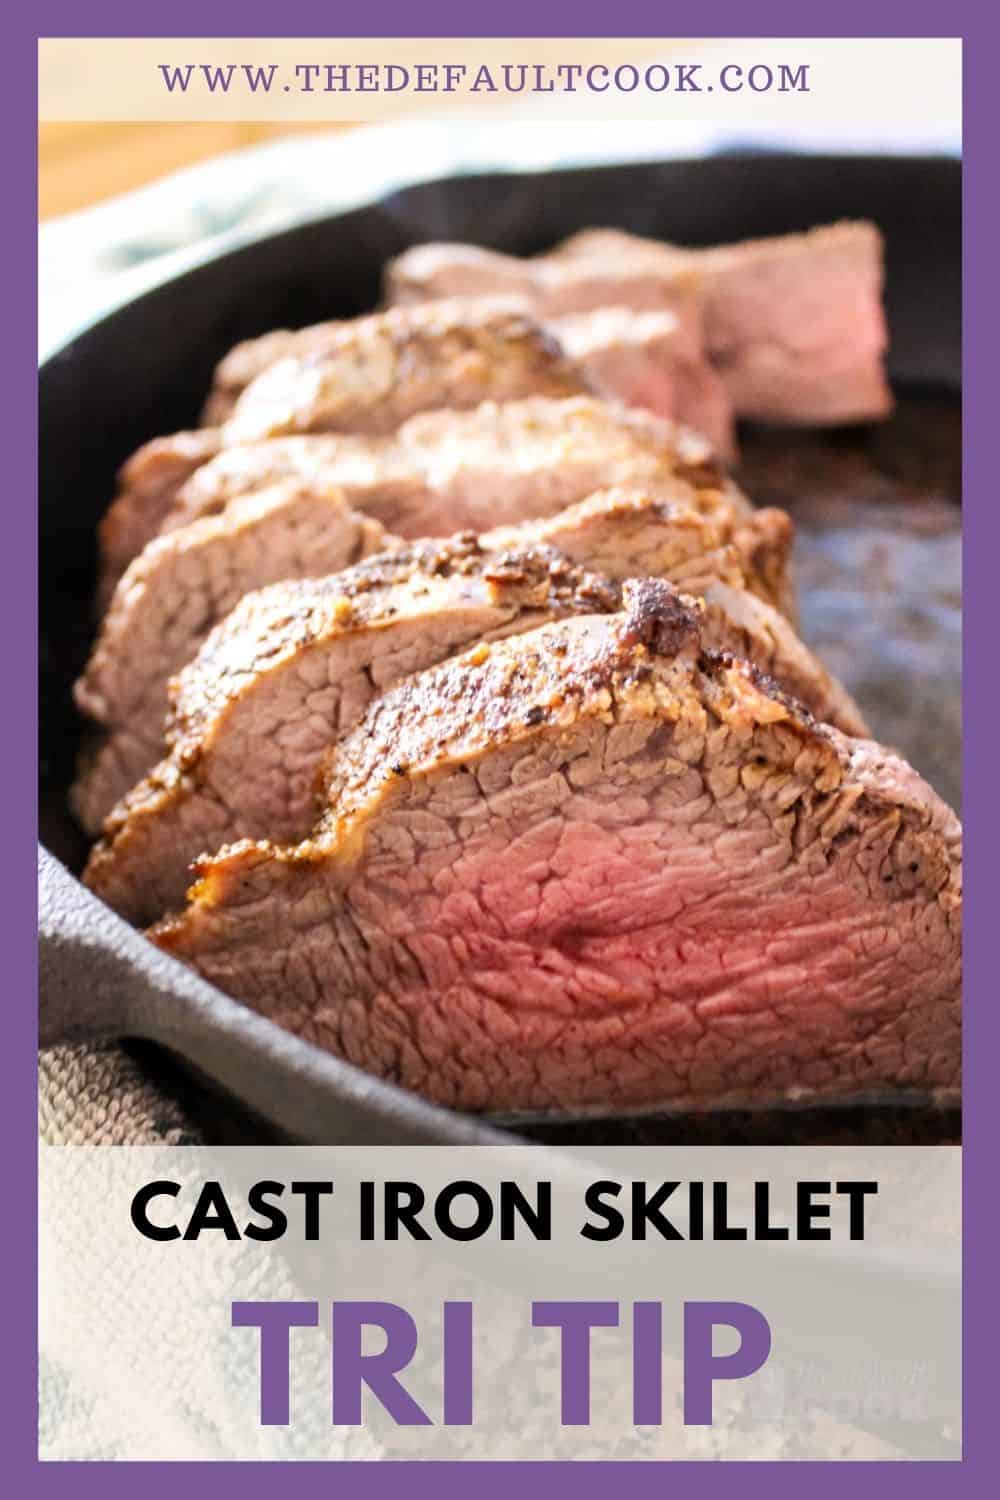 Sliced tri tip in a skillet with the recipe name below it.